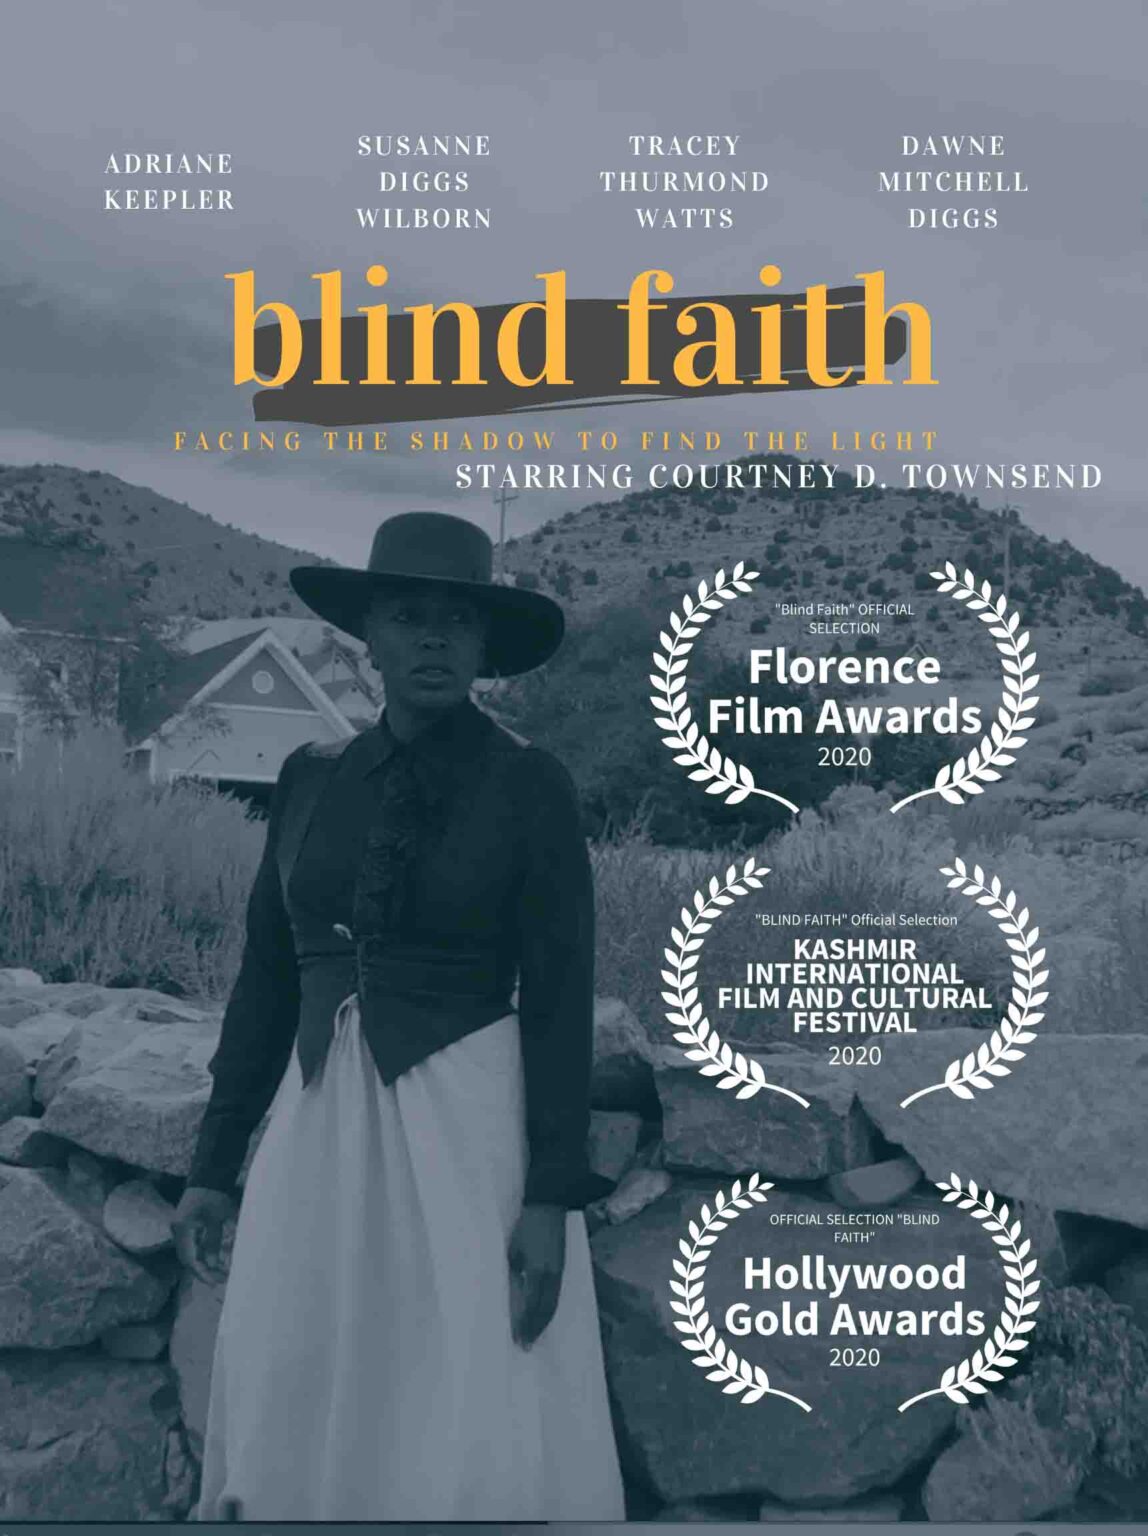 The new short film 'Blind Faith' starring Courtney Townsend is a Western that tells the story of the wives of cowboys.